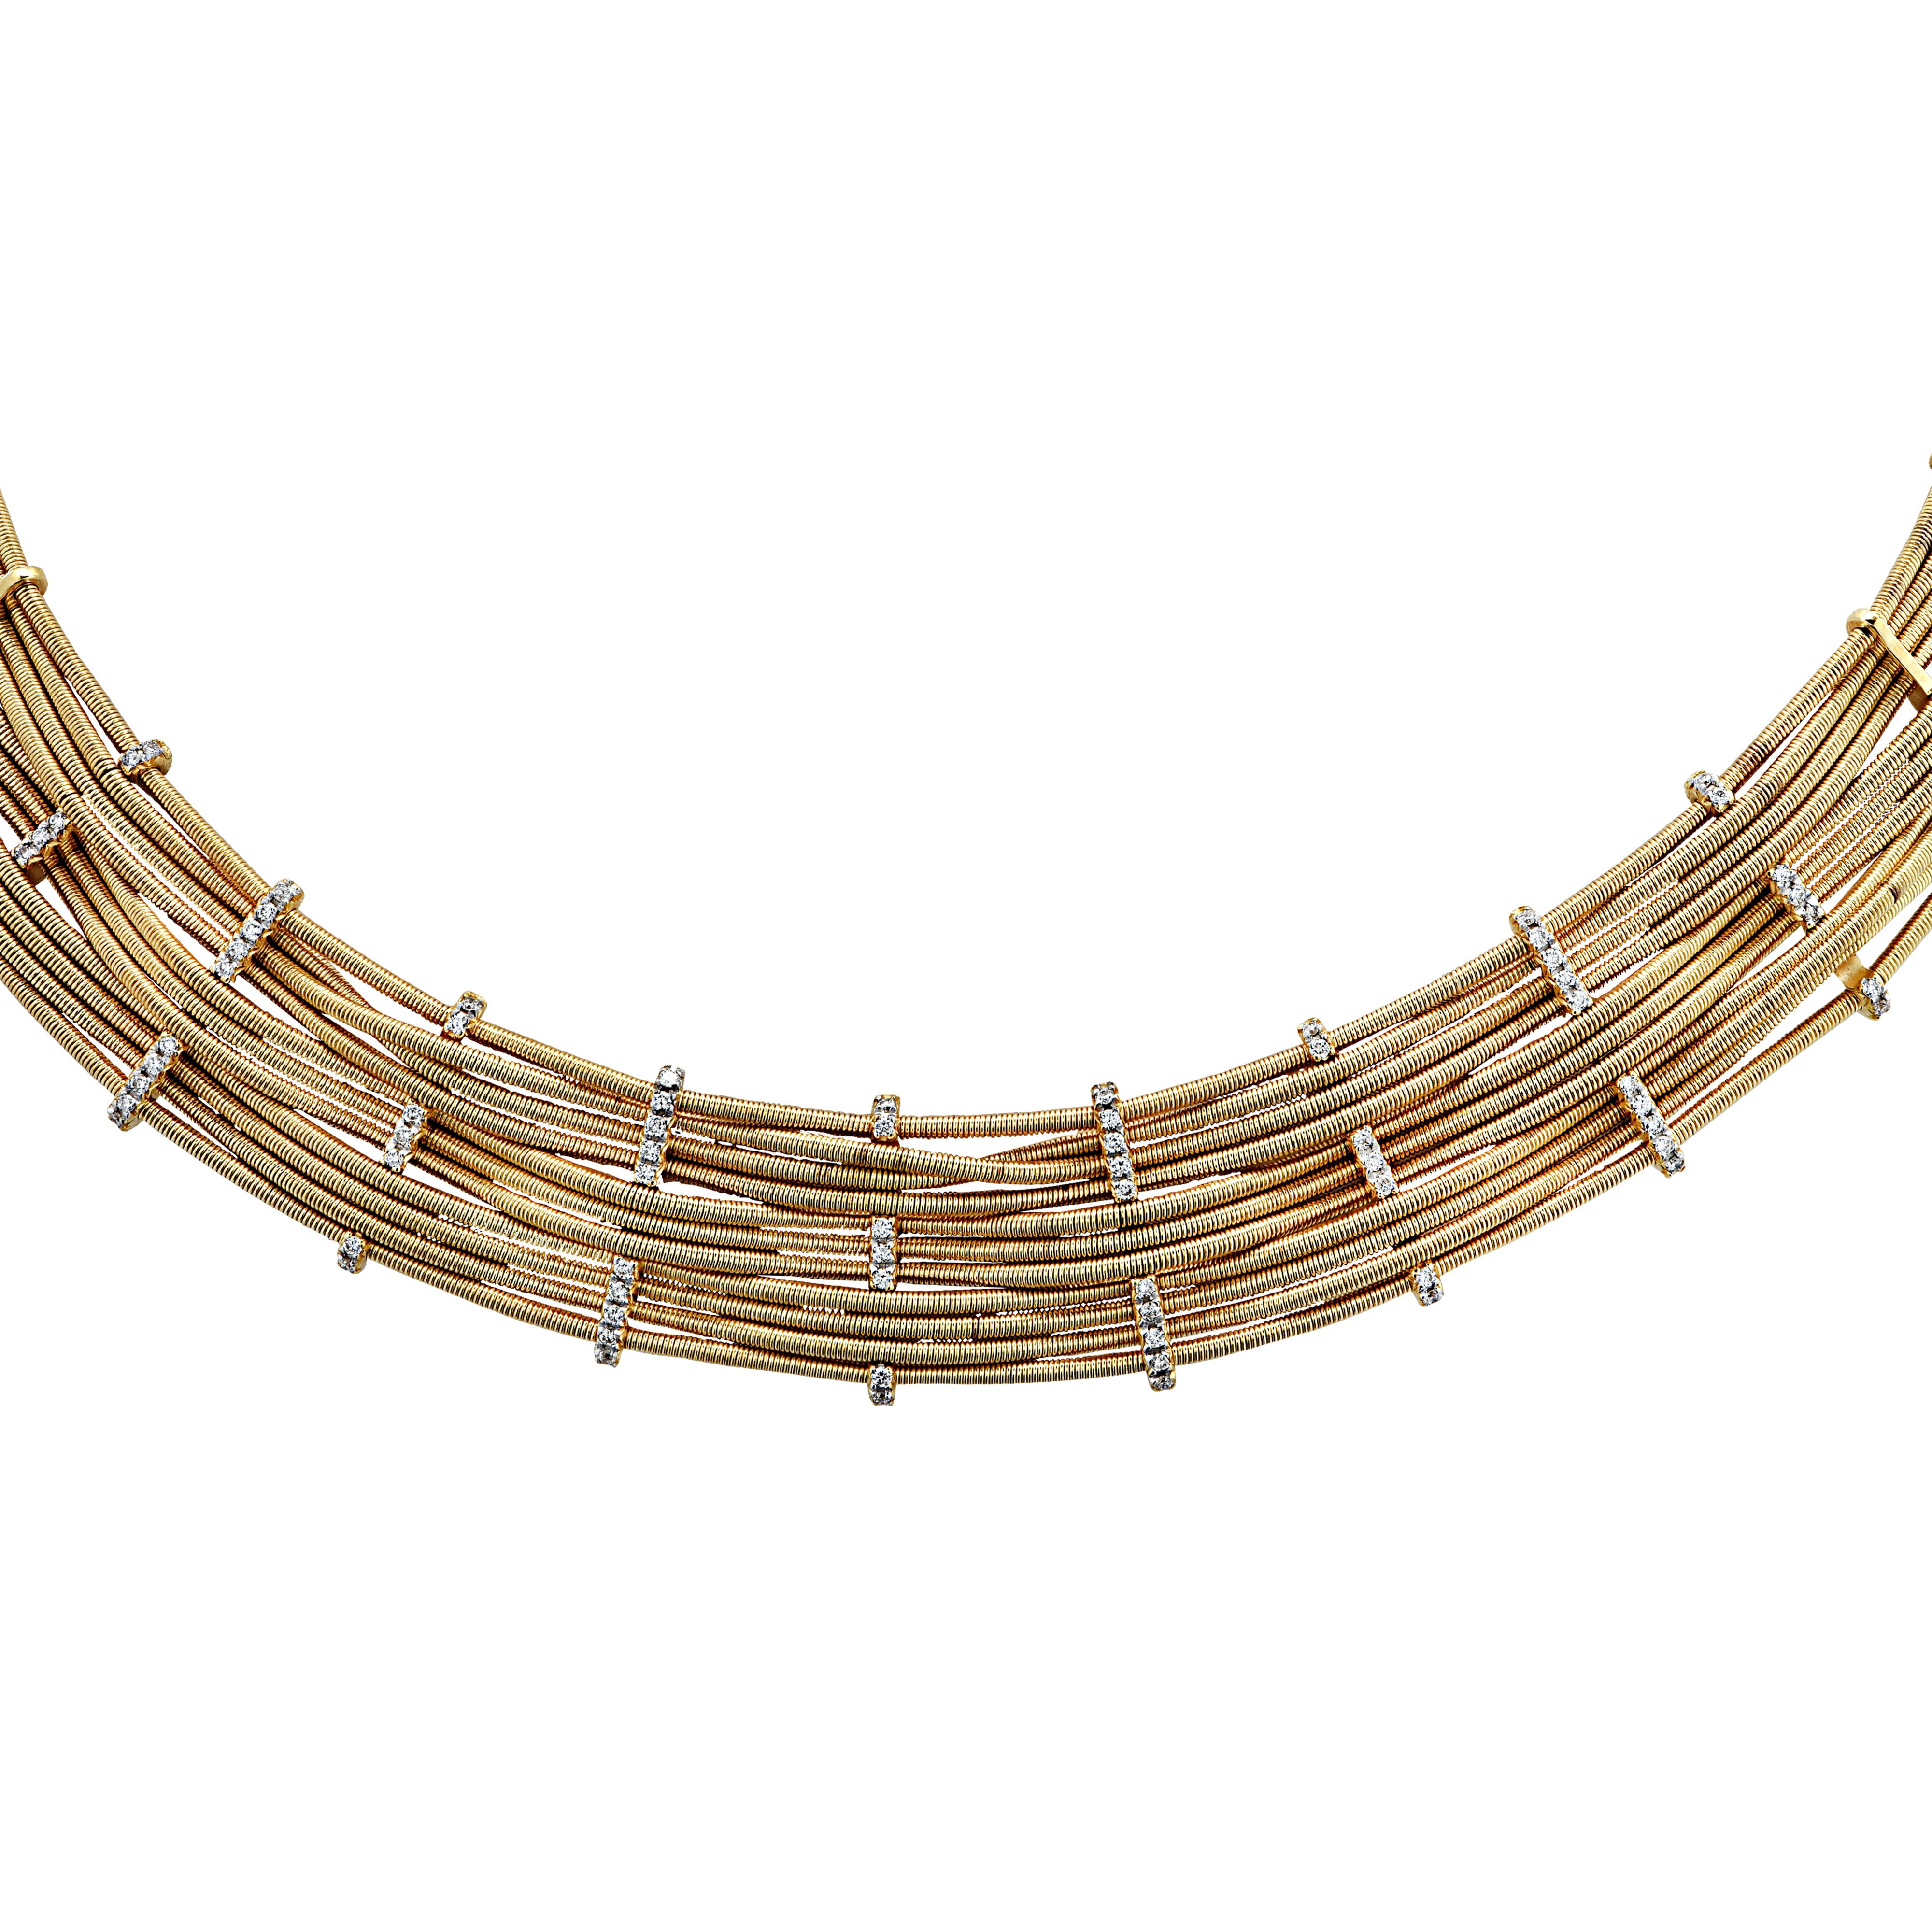 Sensational Marco Bicego collar necklace handcrafted in Italy in 18 karat yellow gold, featuring 75 round brilliant cut diamonds weighing approximately .56 carats total, G color, VS clarity. Pieces of gold are coiled into strands and woven between